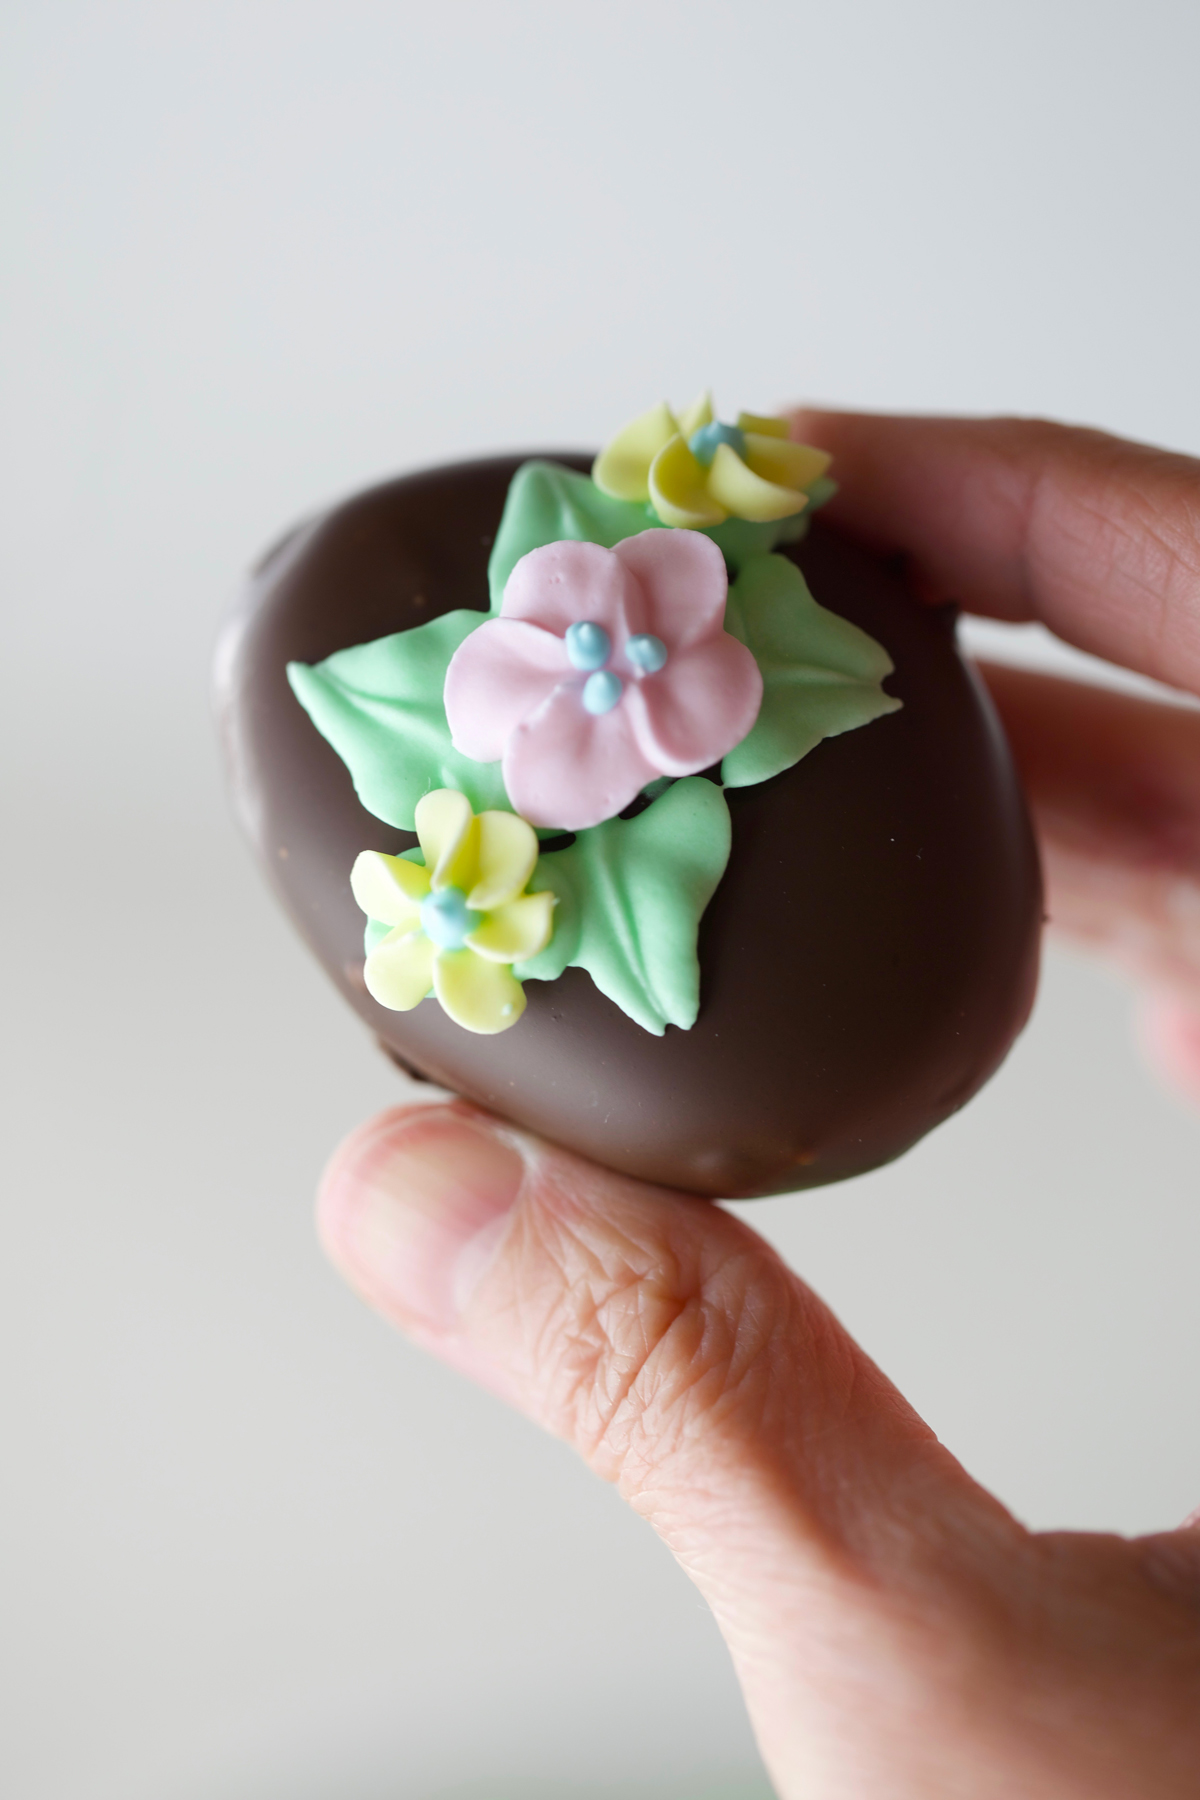 Hand holding one chocolate Easter egg with pretty royal icing flowers in pastel colors.